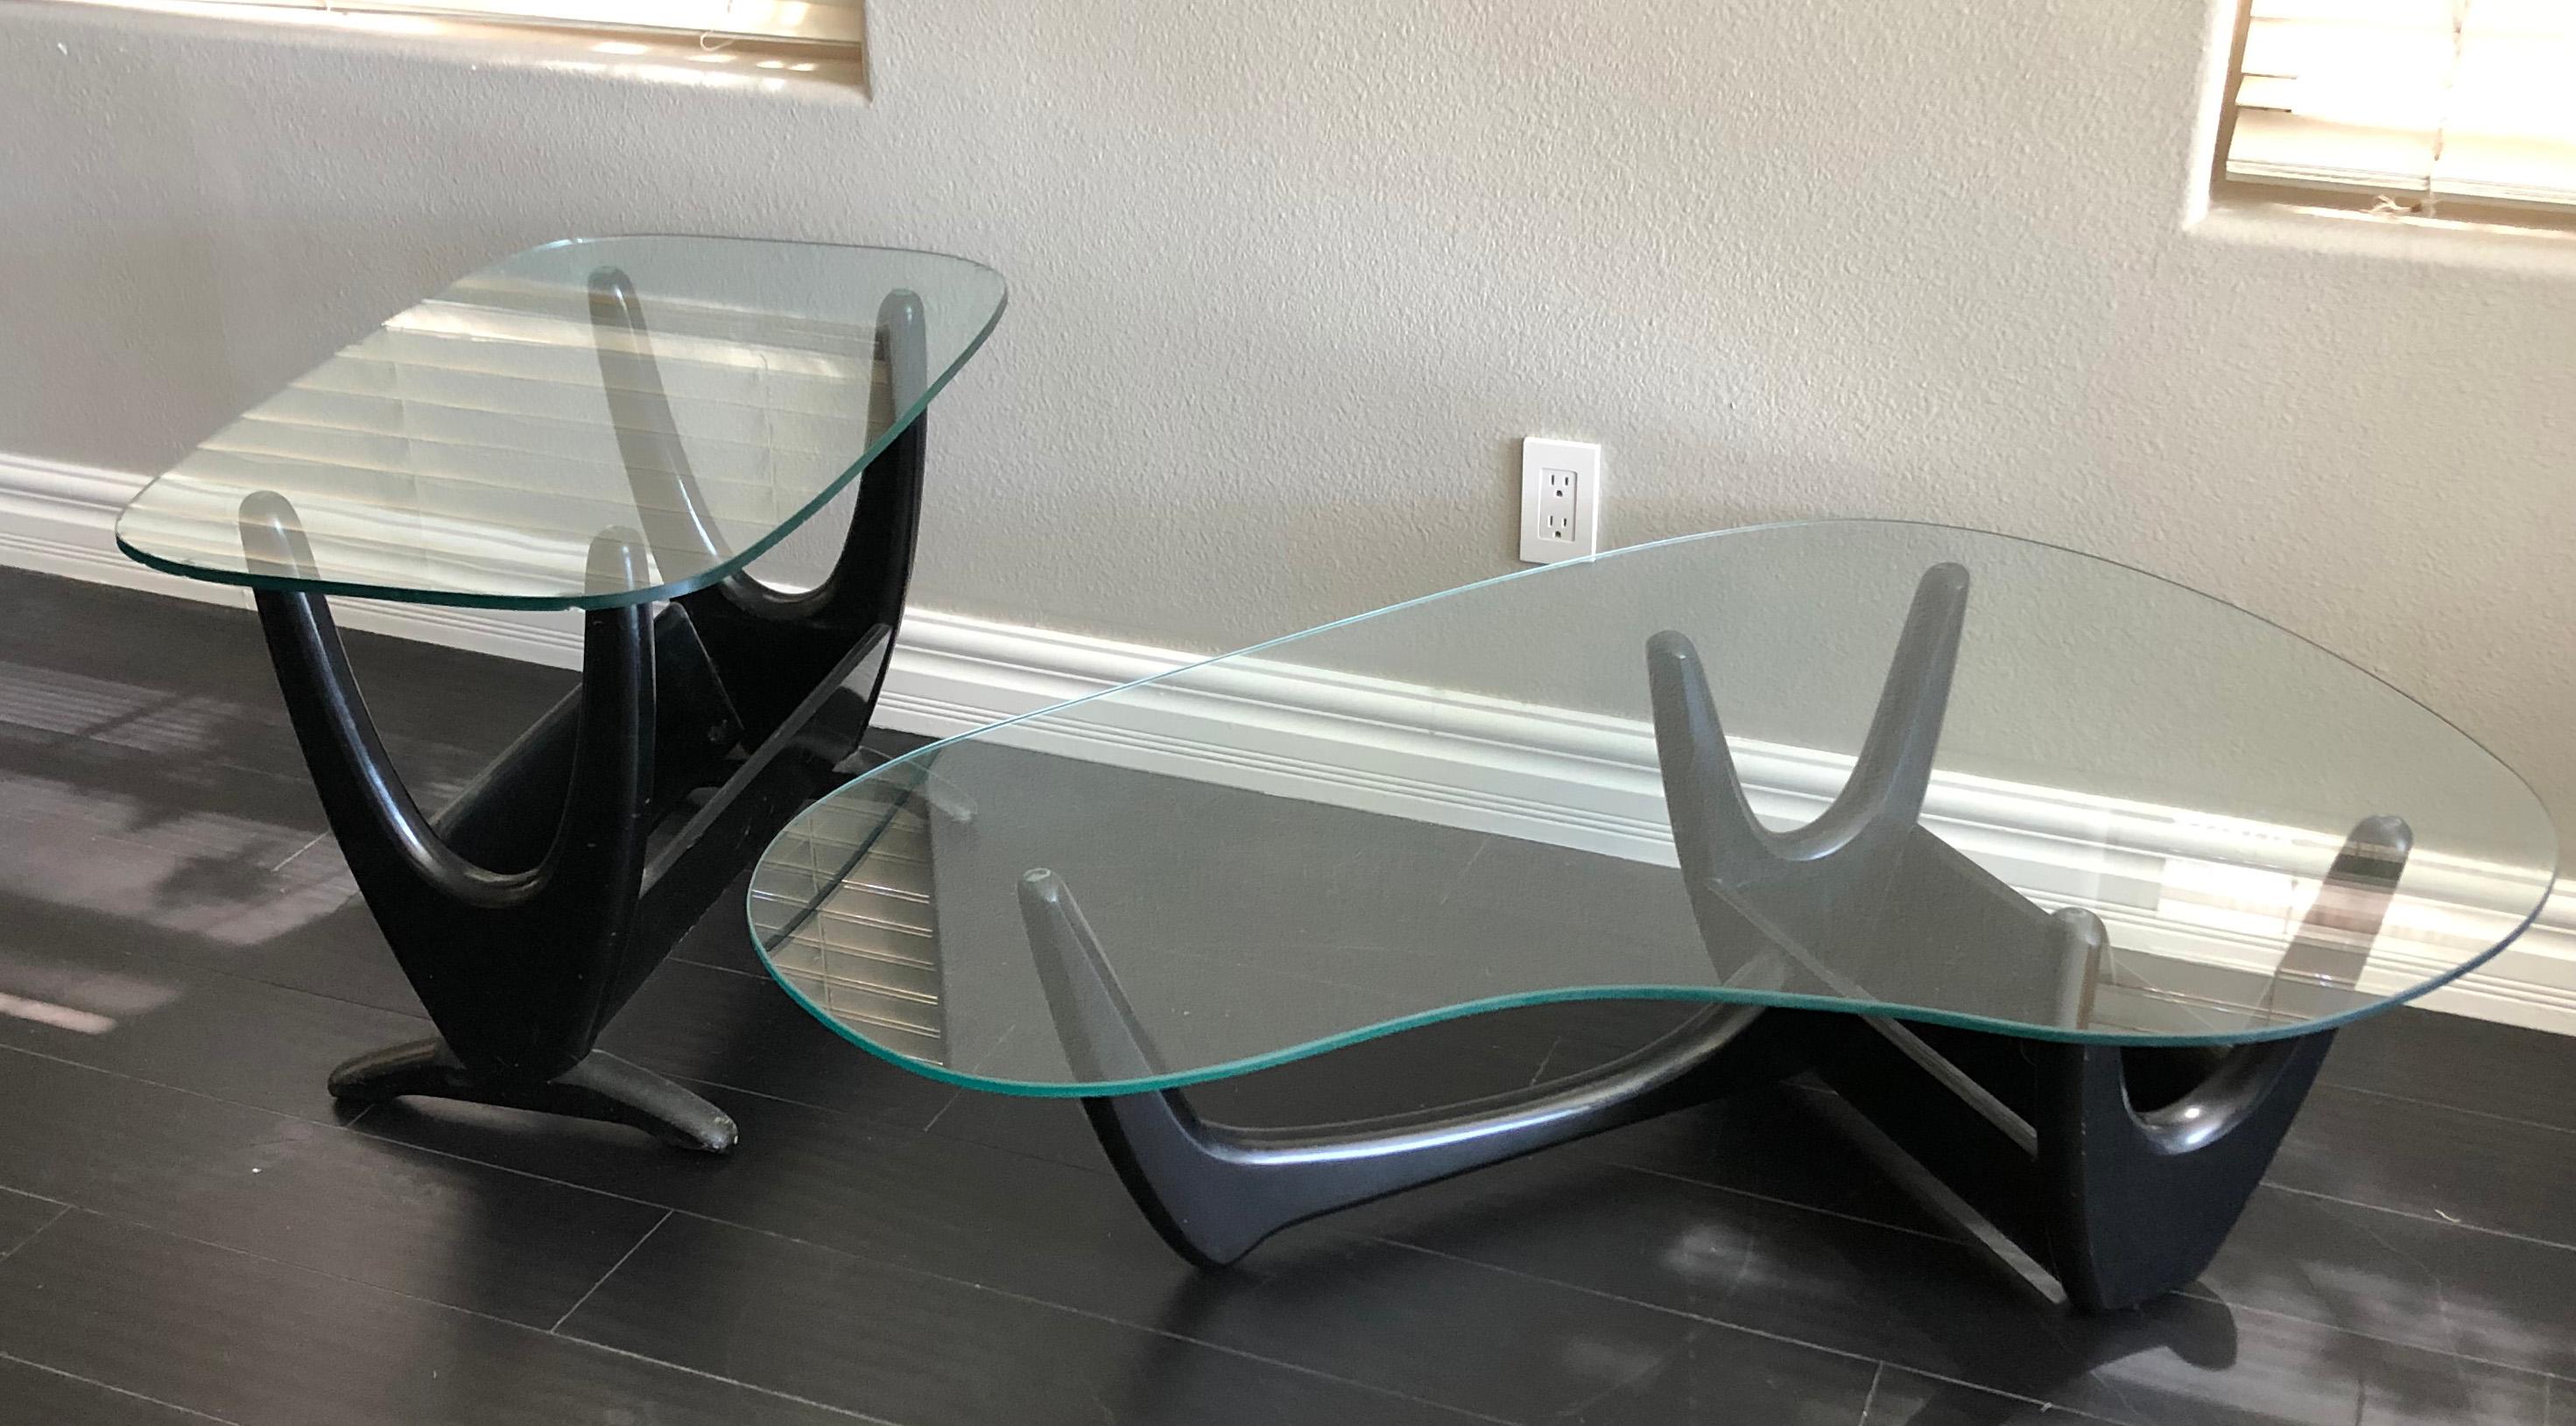 Available right now we have this gorgeous ebonized Pearsall style coffee table and matching side table. These tables are indeed from the 1960s and feature not only a sleek biomorphic shape, they also have their original custom planters that fit